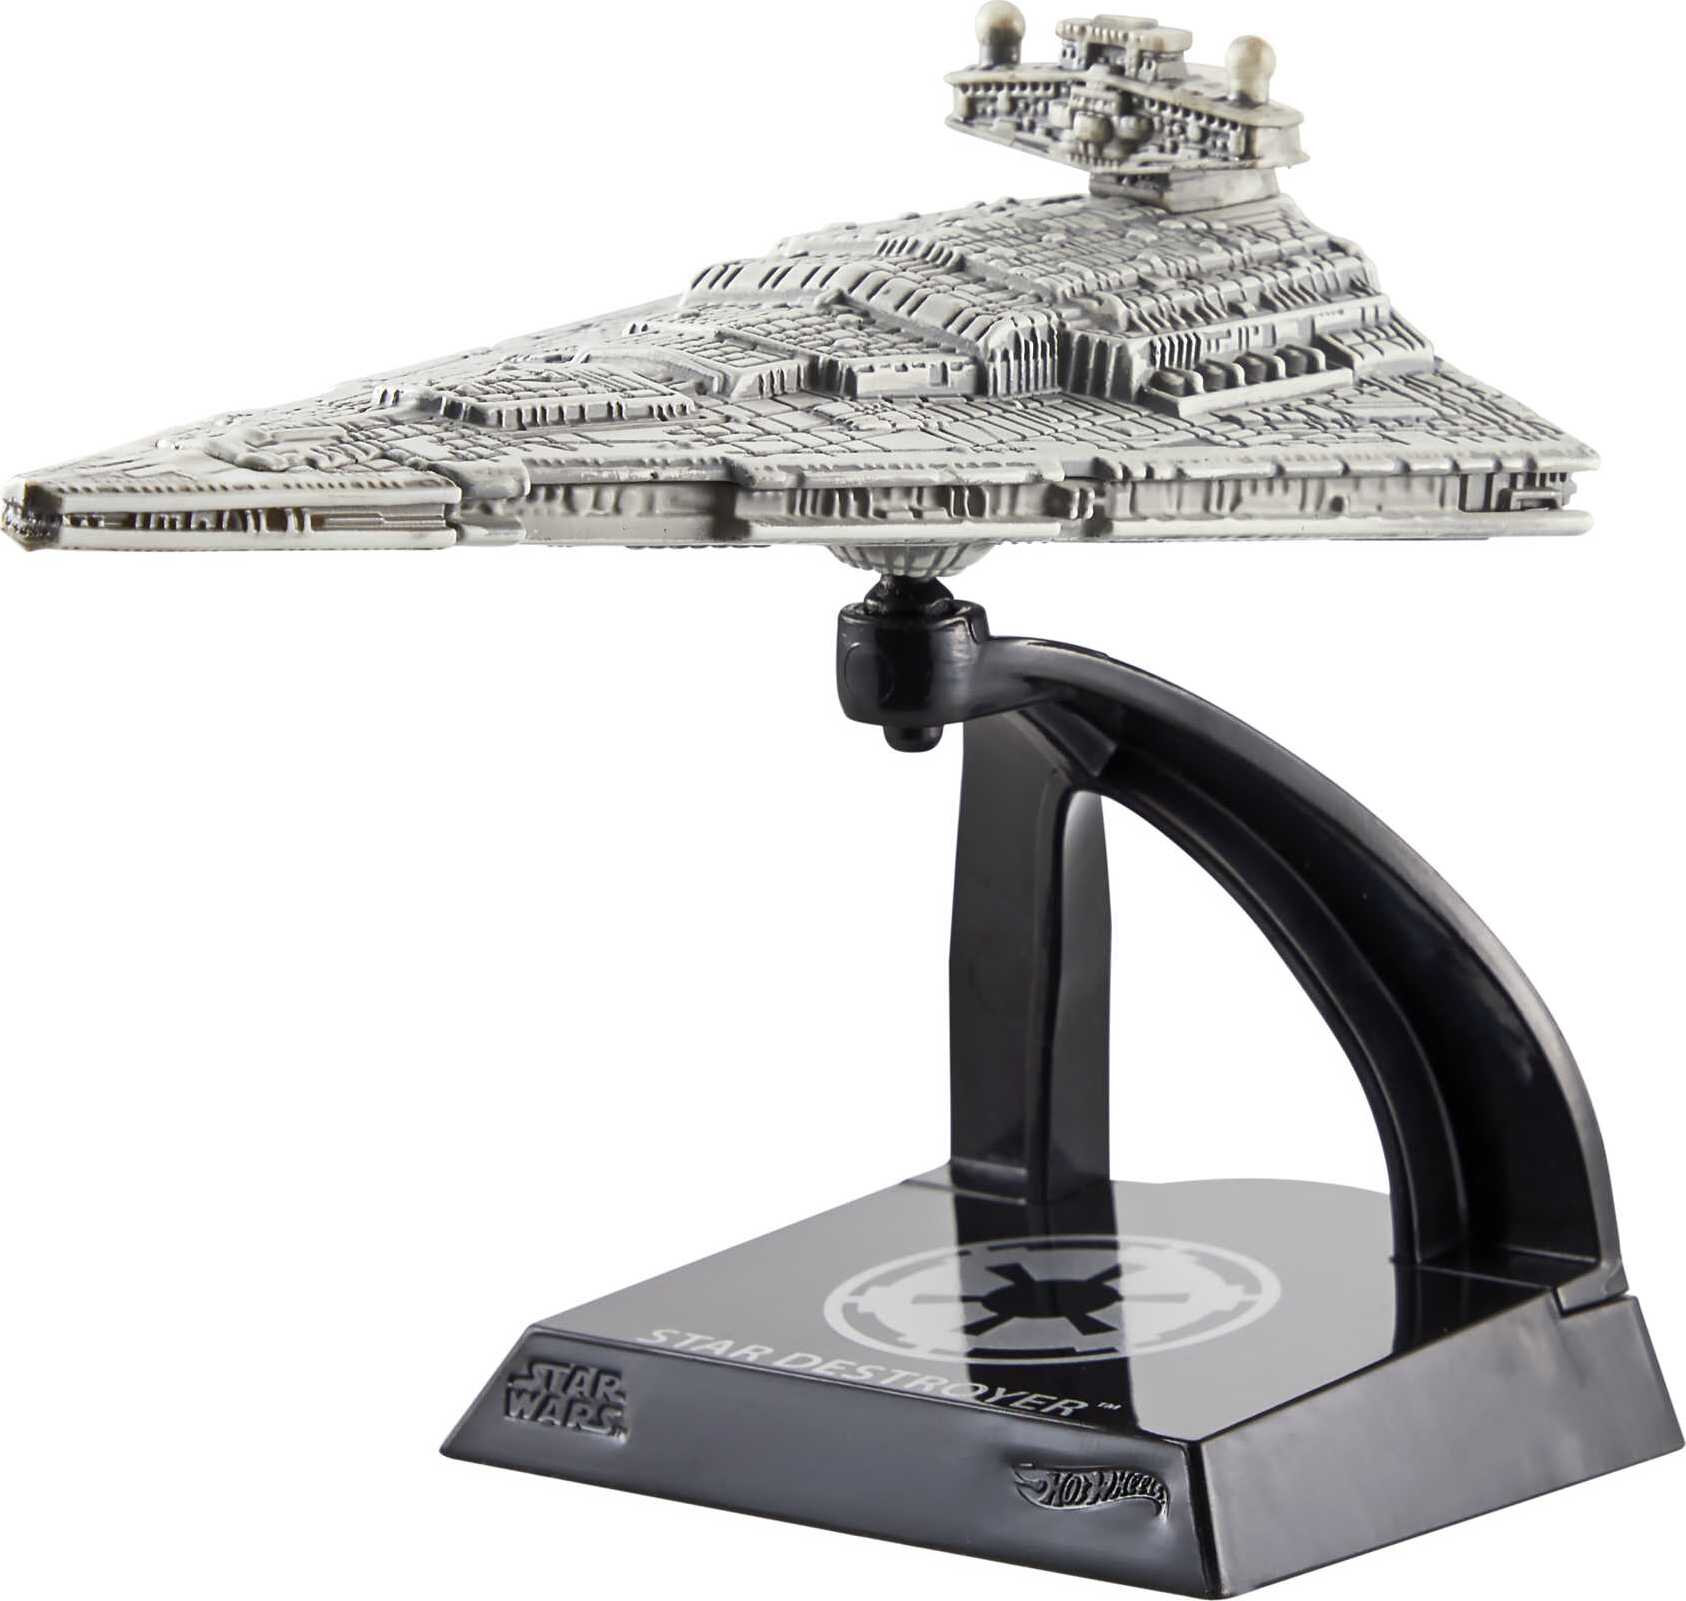 Hot Wheels Star Wars Starships Select, Premium Replica, Gift For Adults Collectors - image 2 of 5